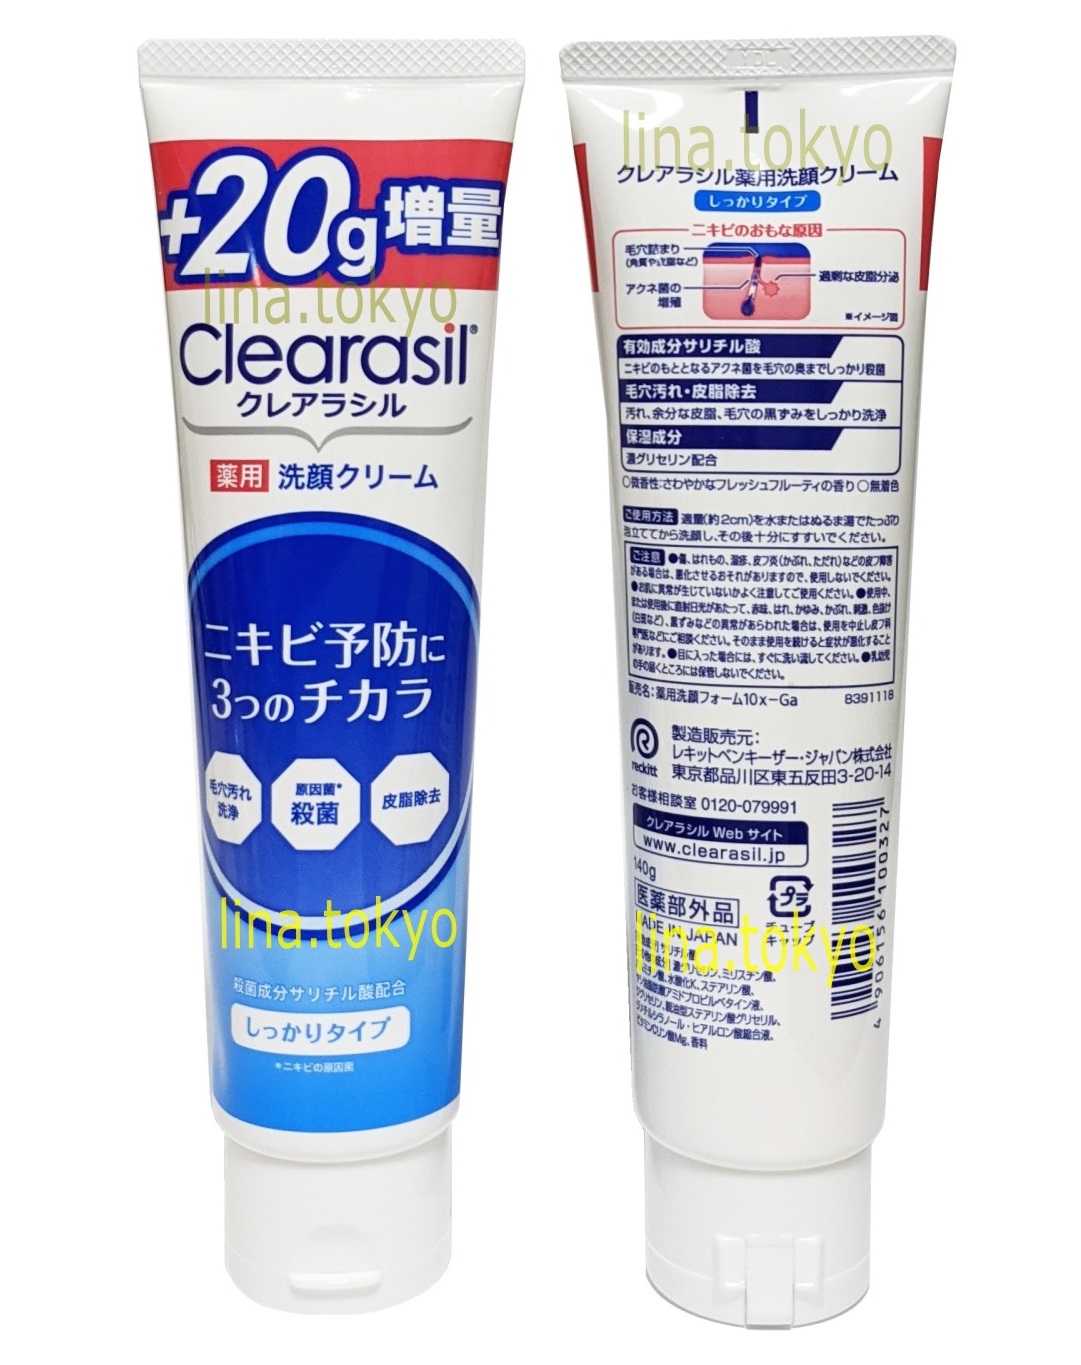 Clearasil cleansing1